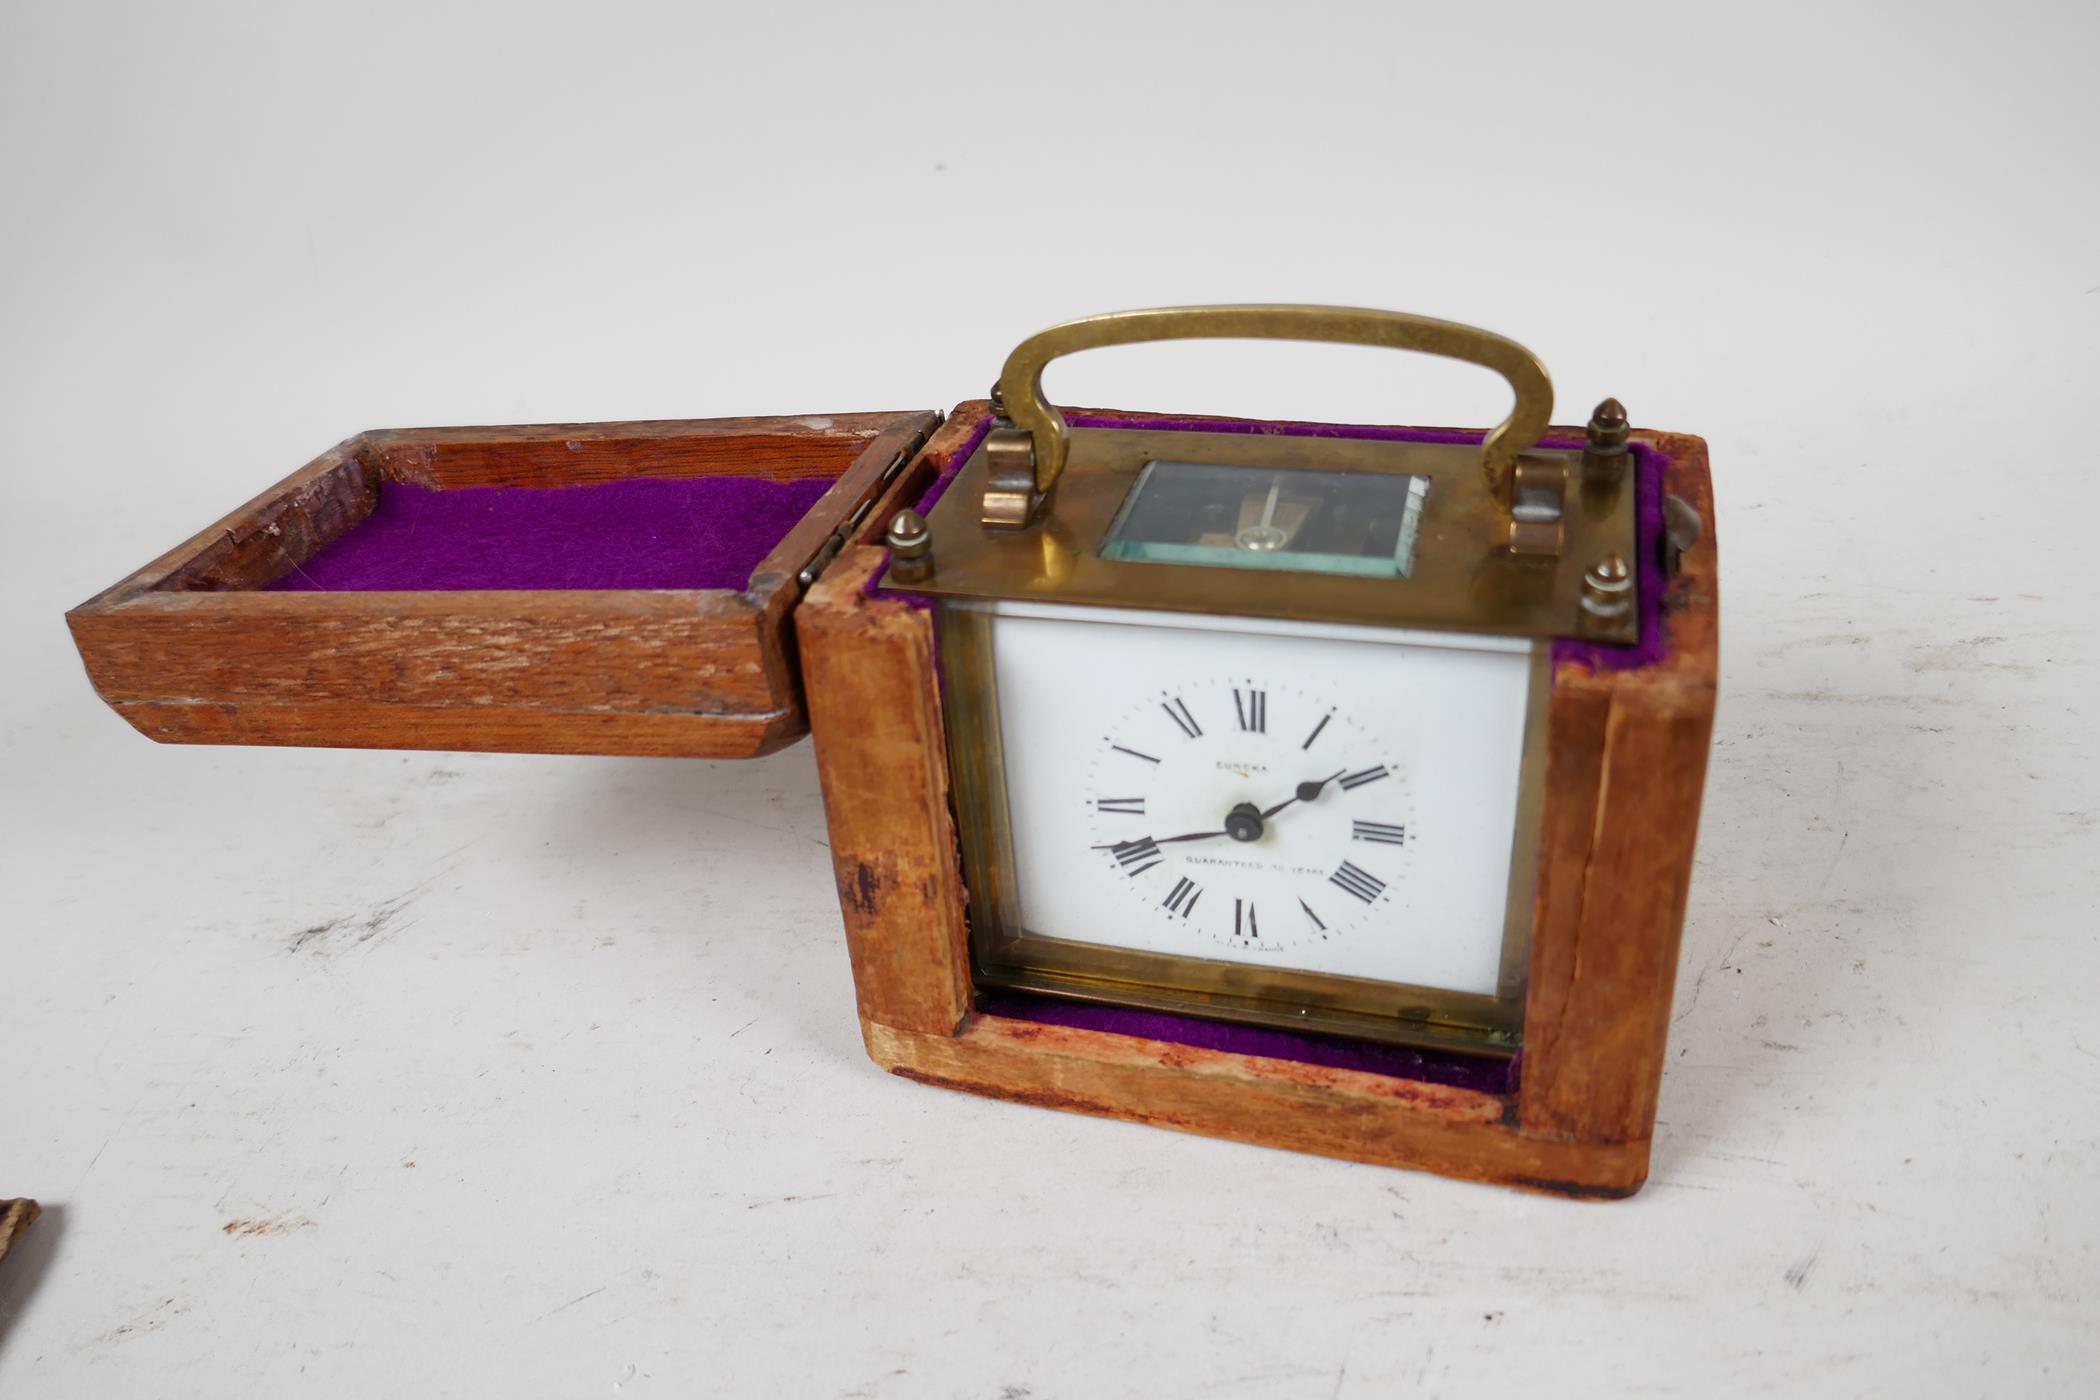 A Eureka brass cased carriage clock in a travel case, the clock with white enamel dial and Roman